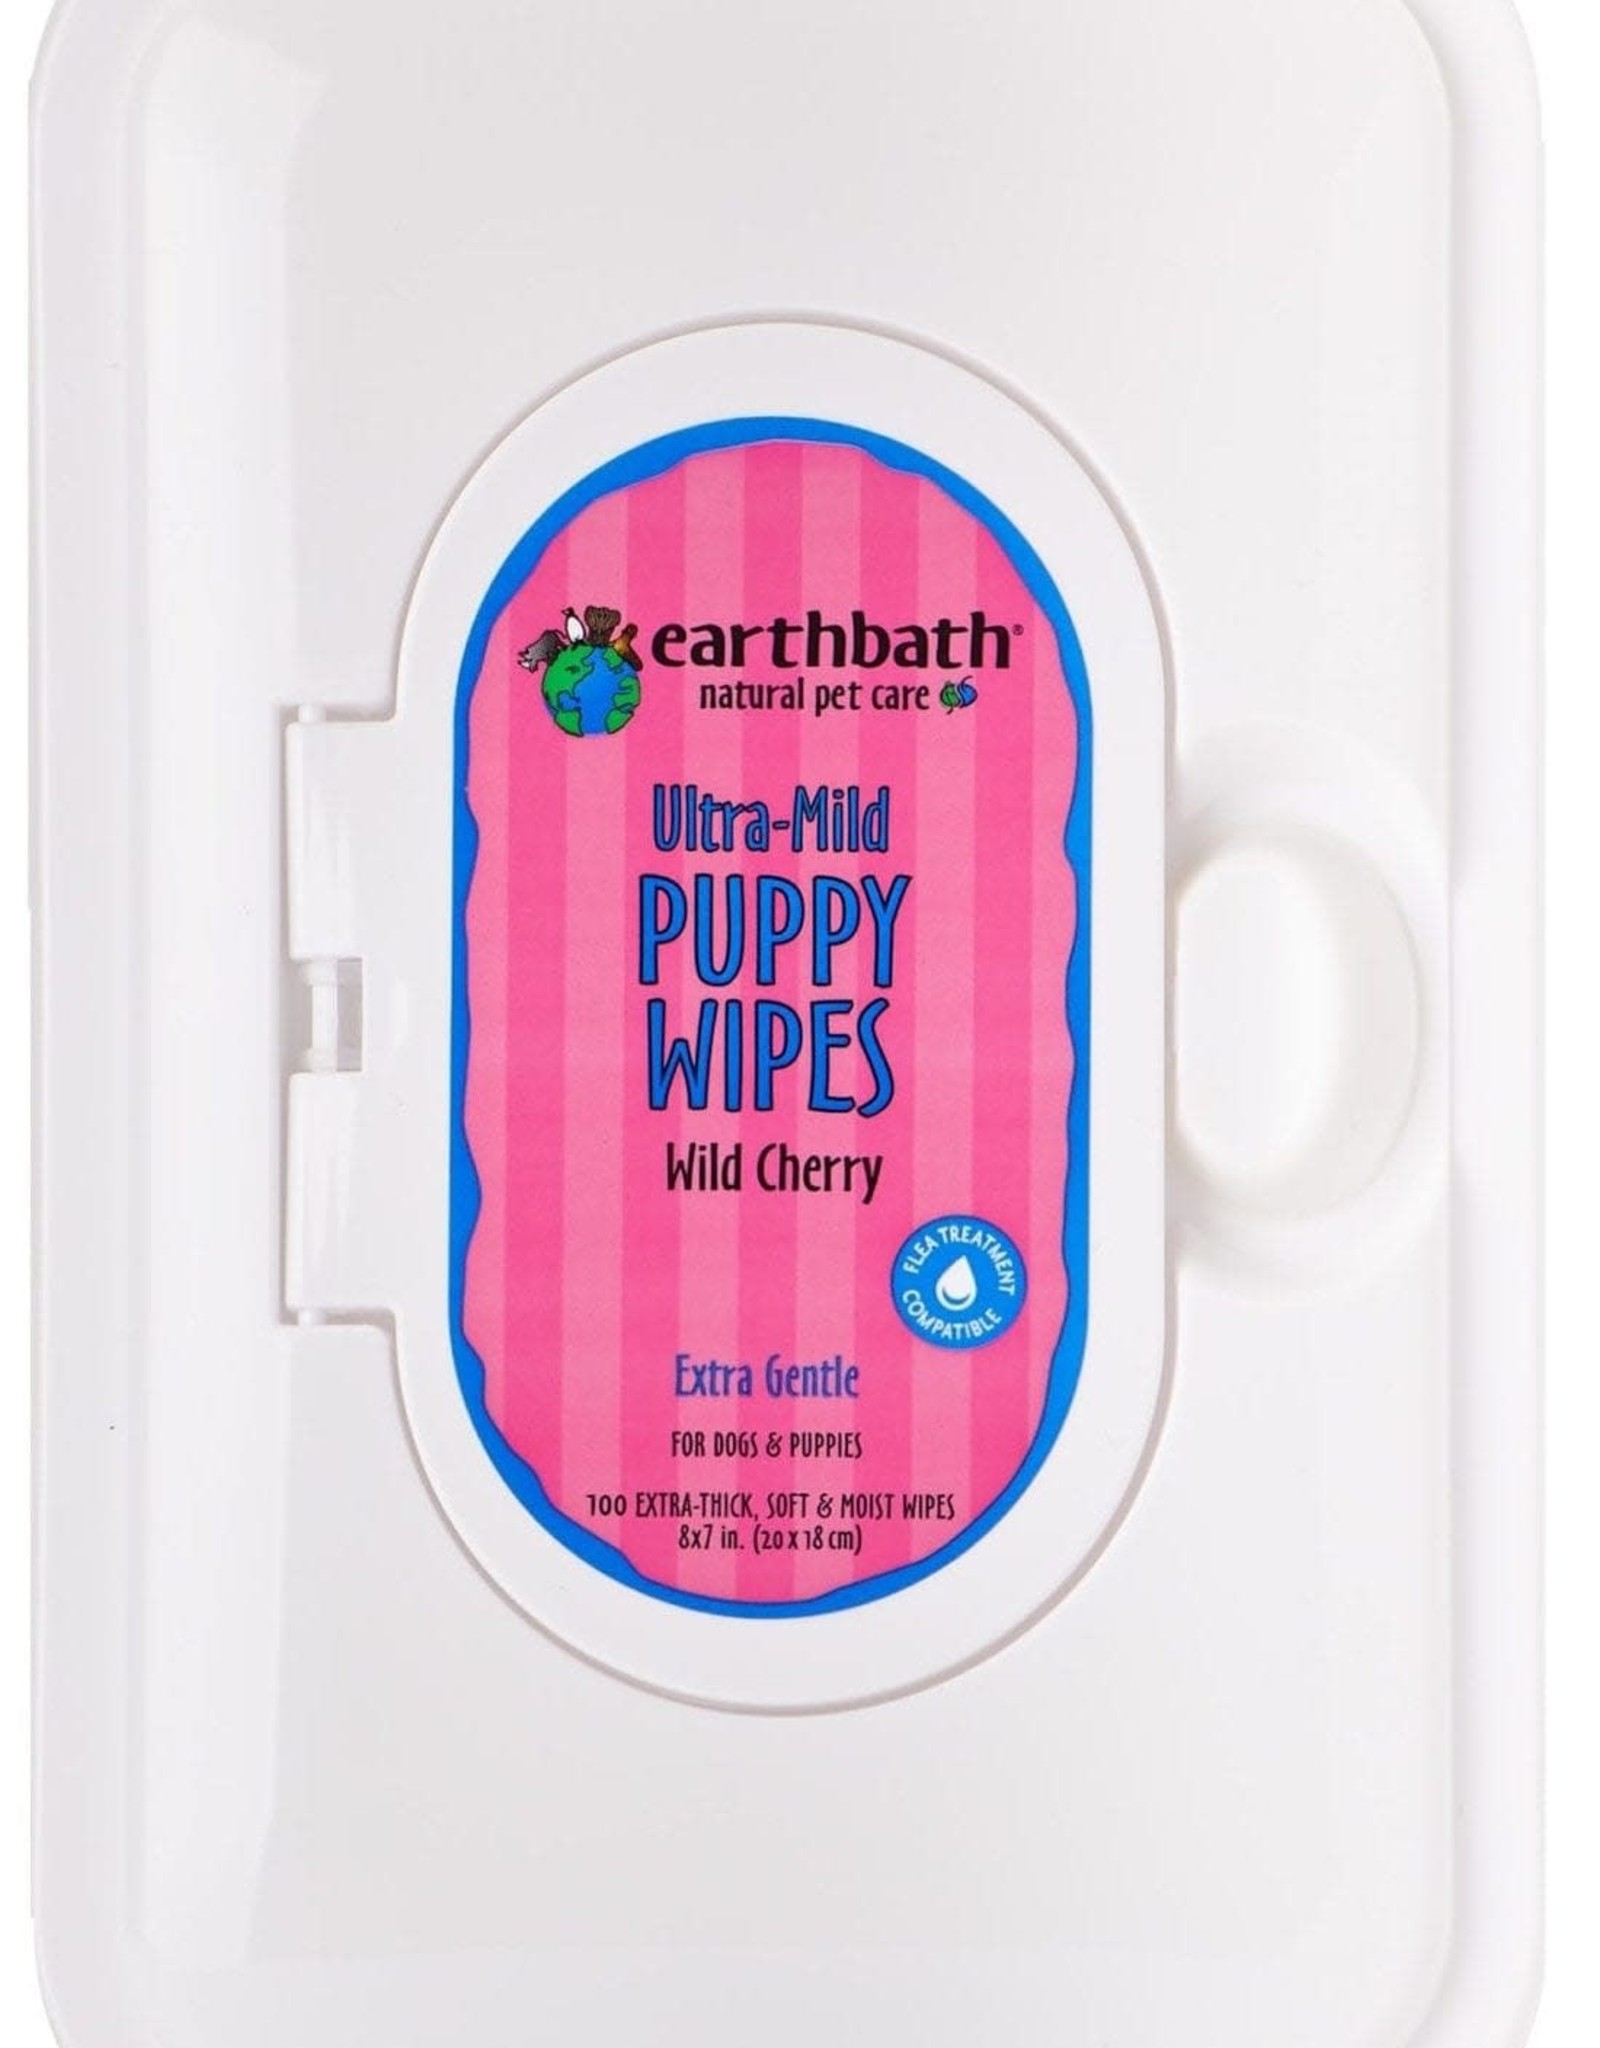 EARTHBATH Earthbath Ultra-Mild Wild Cherry Grooming Wipes for Puppies